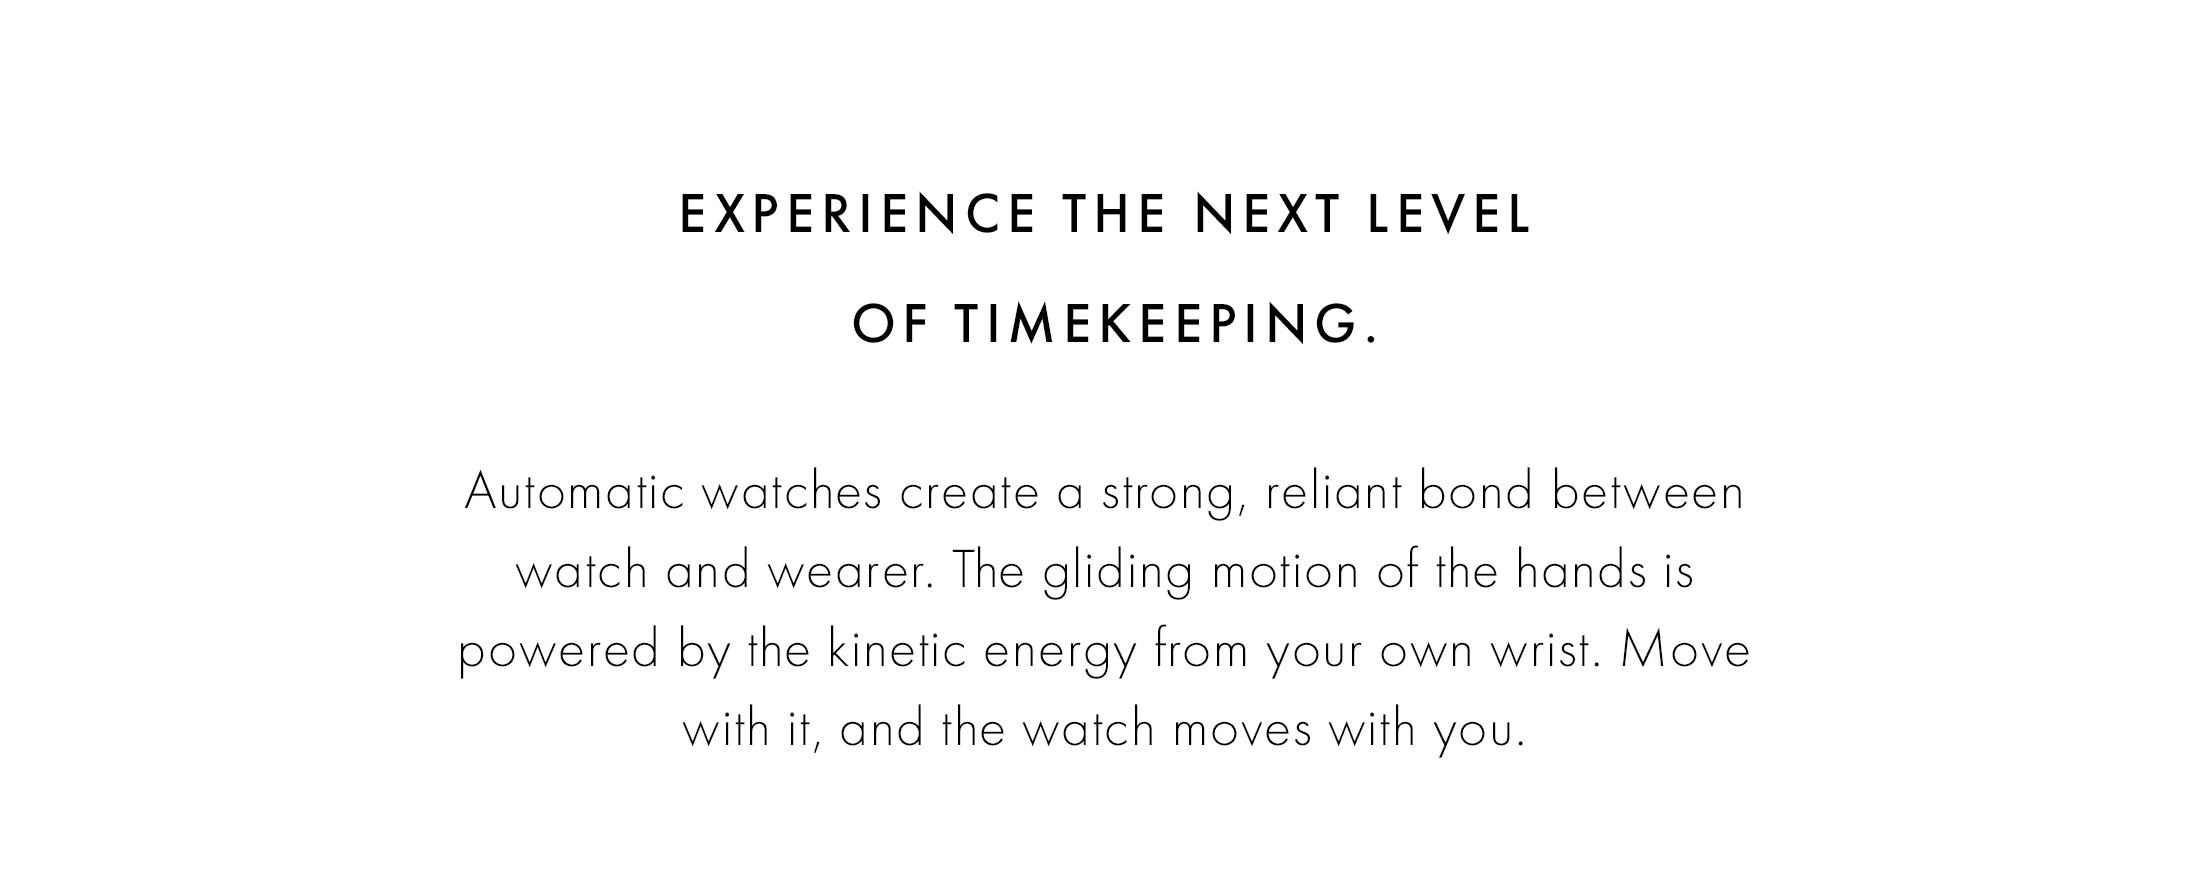 Experience the next level of timekeeping.